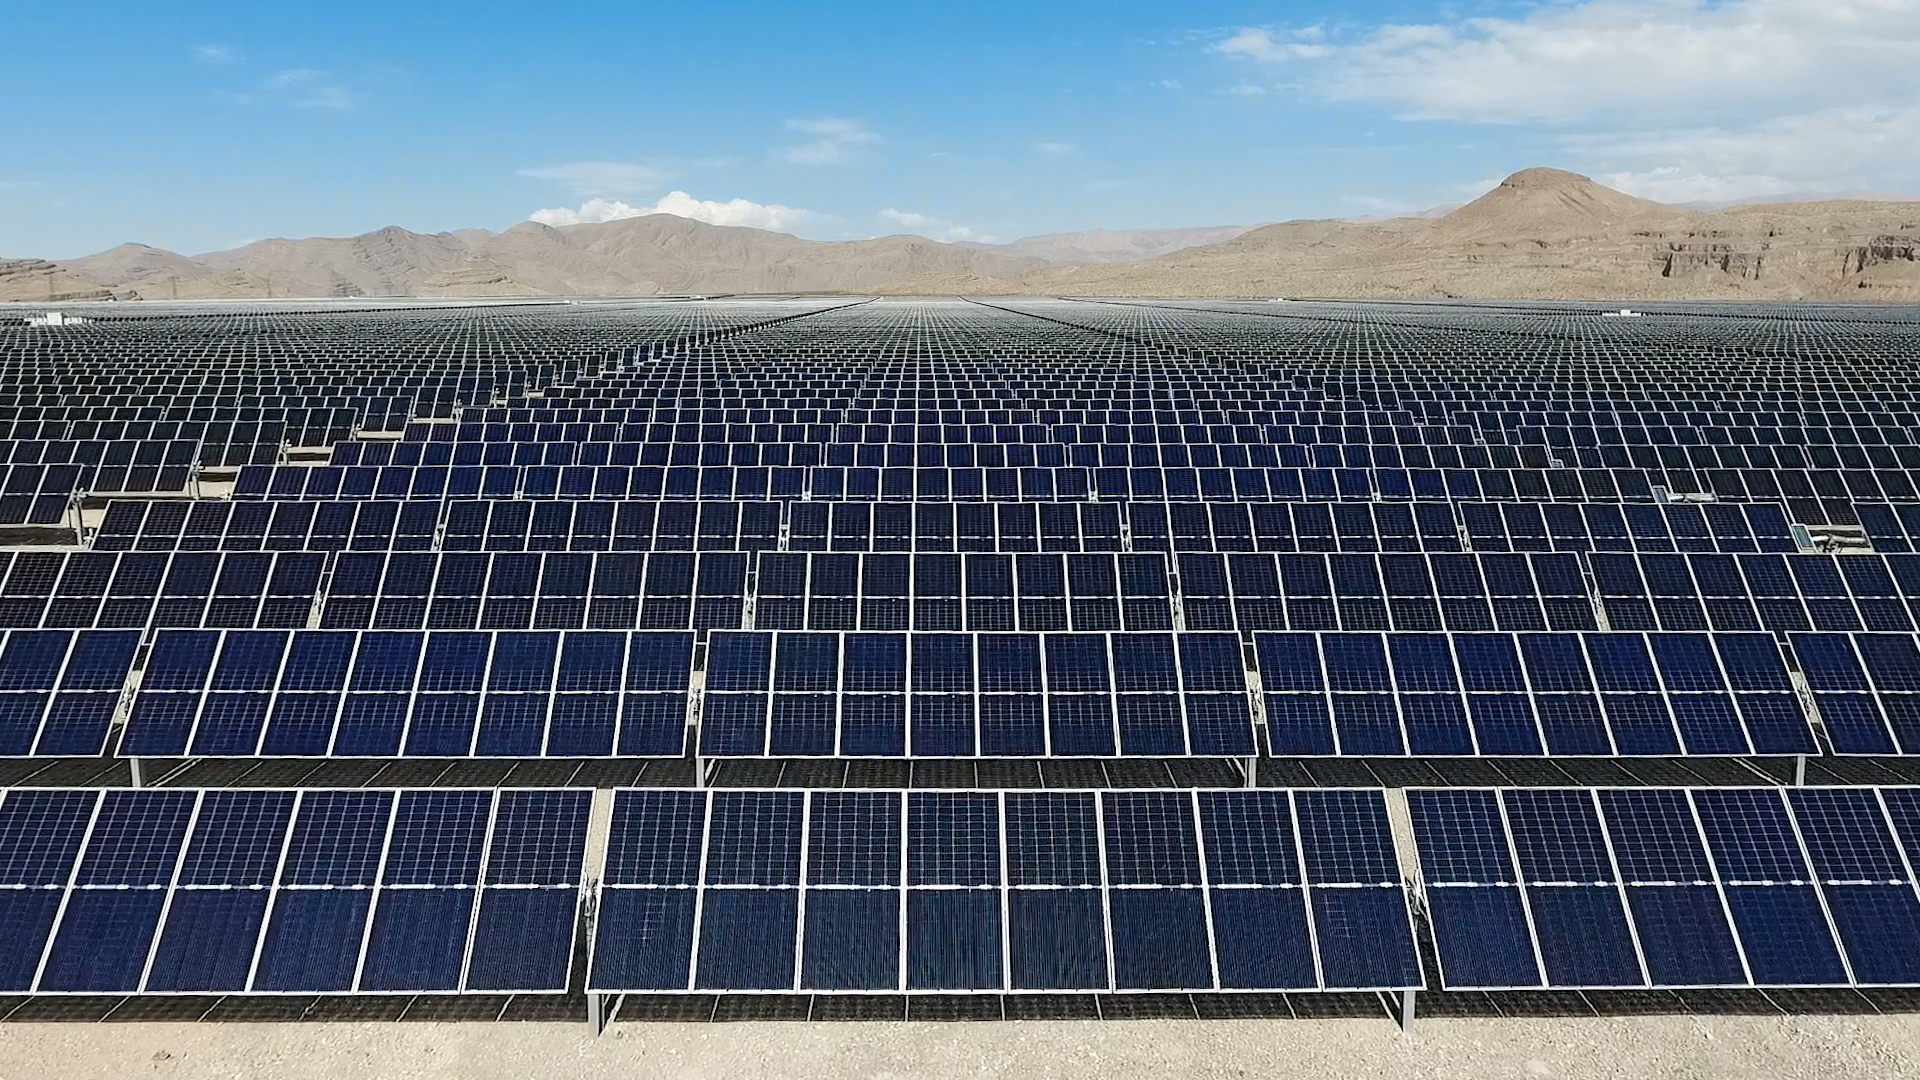 MGM Resorts has launched its 100-megawatt solar array, the hospitality industry’s largest directly sourced renewable electricity project worldwide.